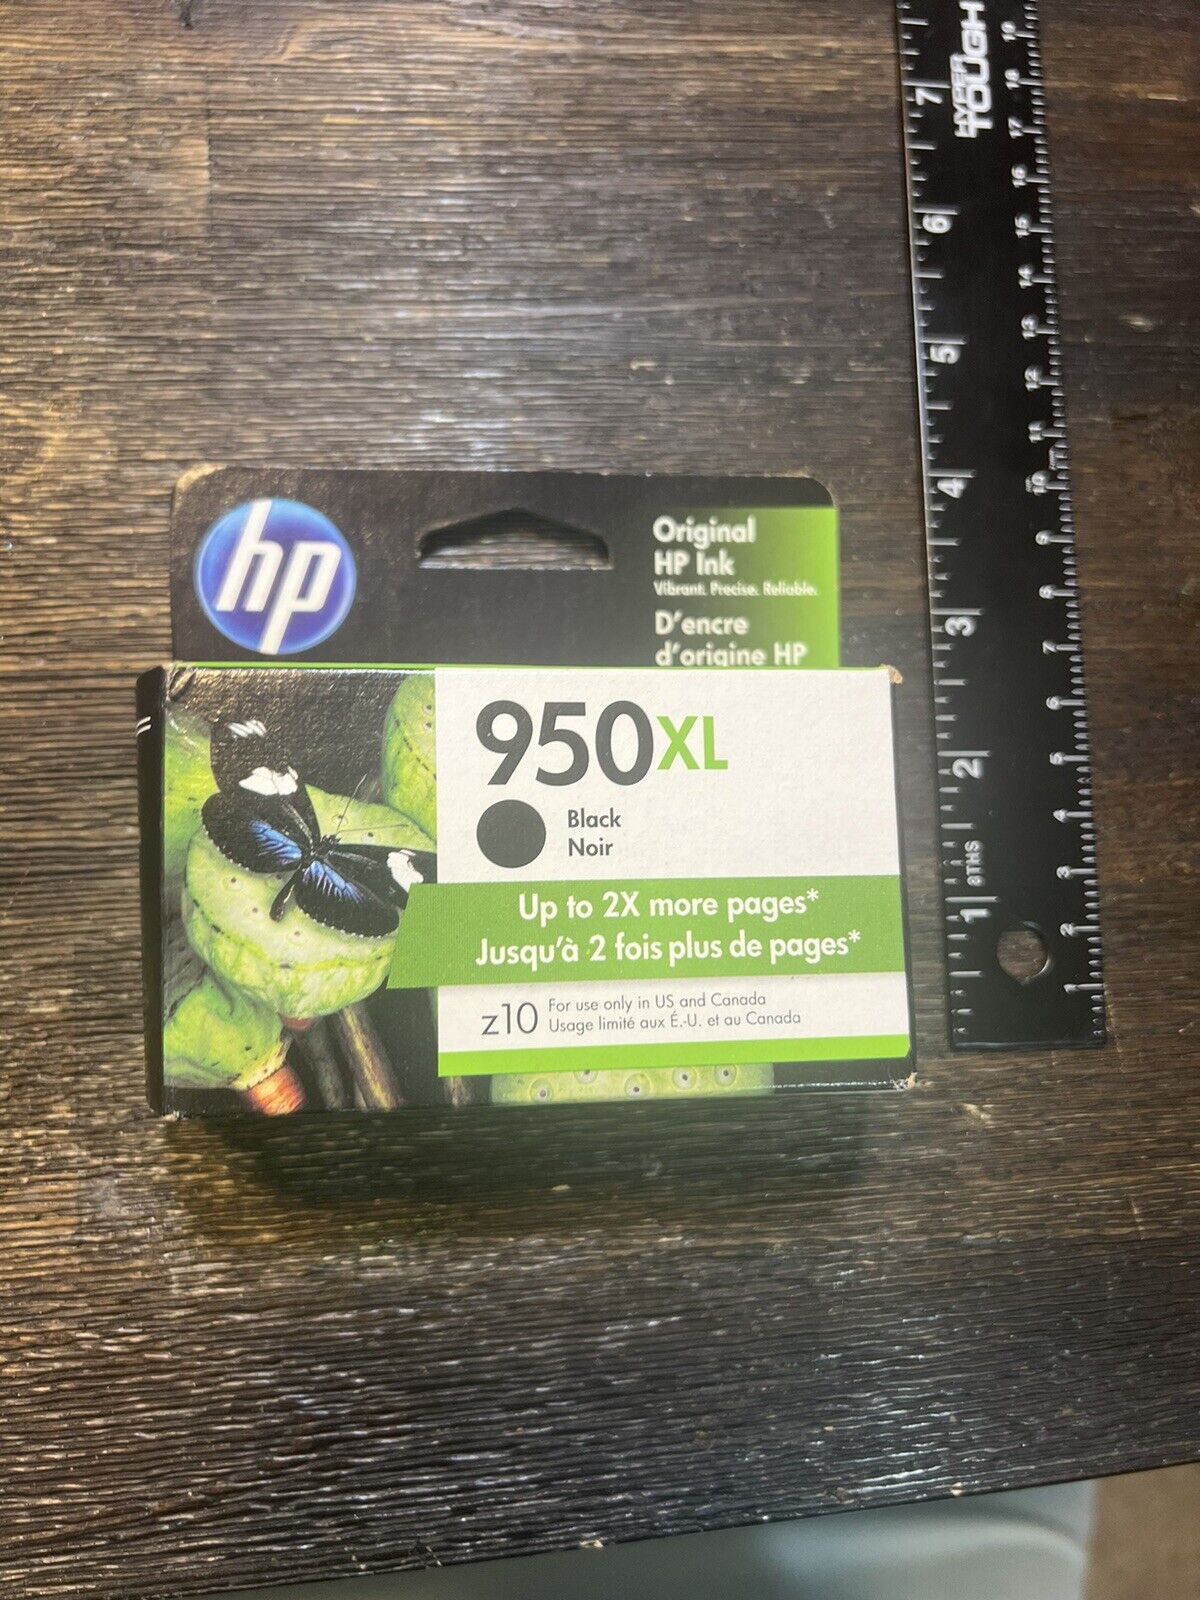 HP OFFICEJET 950 XL BLACK COLOR * BRAND NEW & SEALED PACKAGE EXP 06/2022